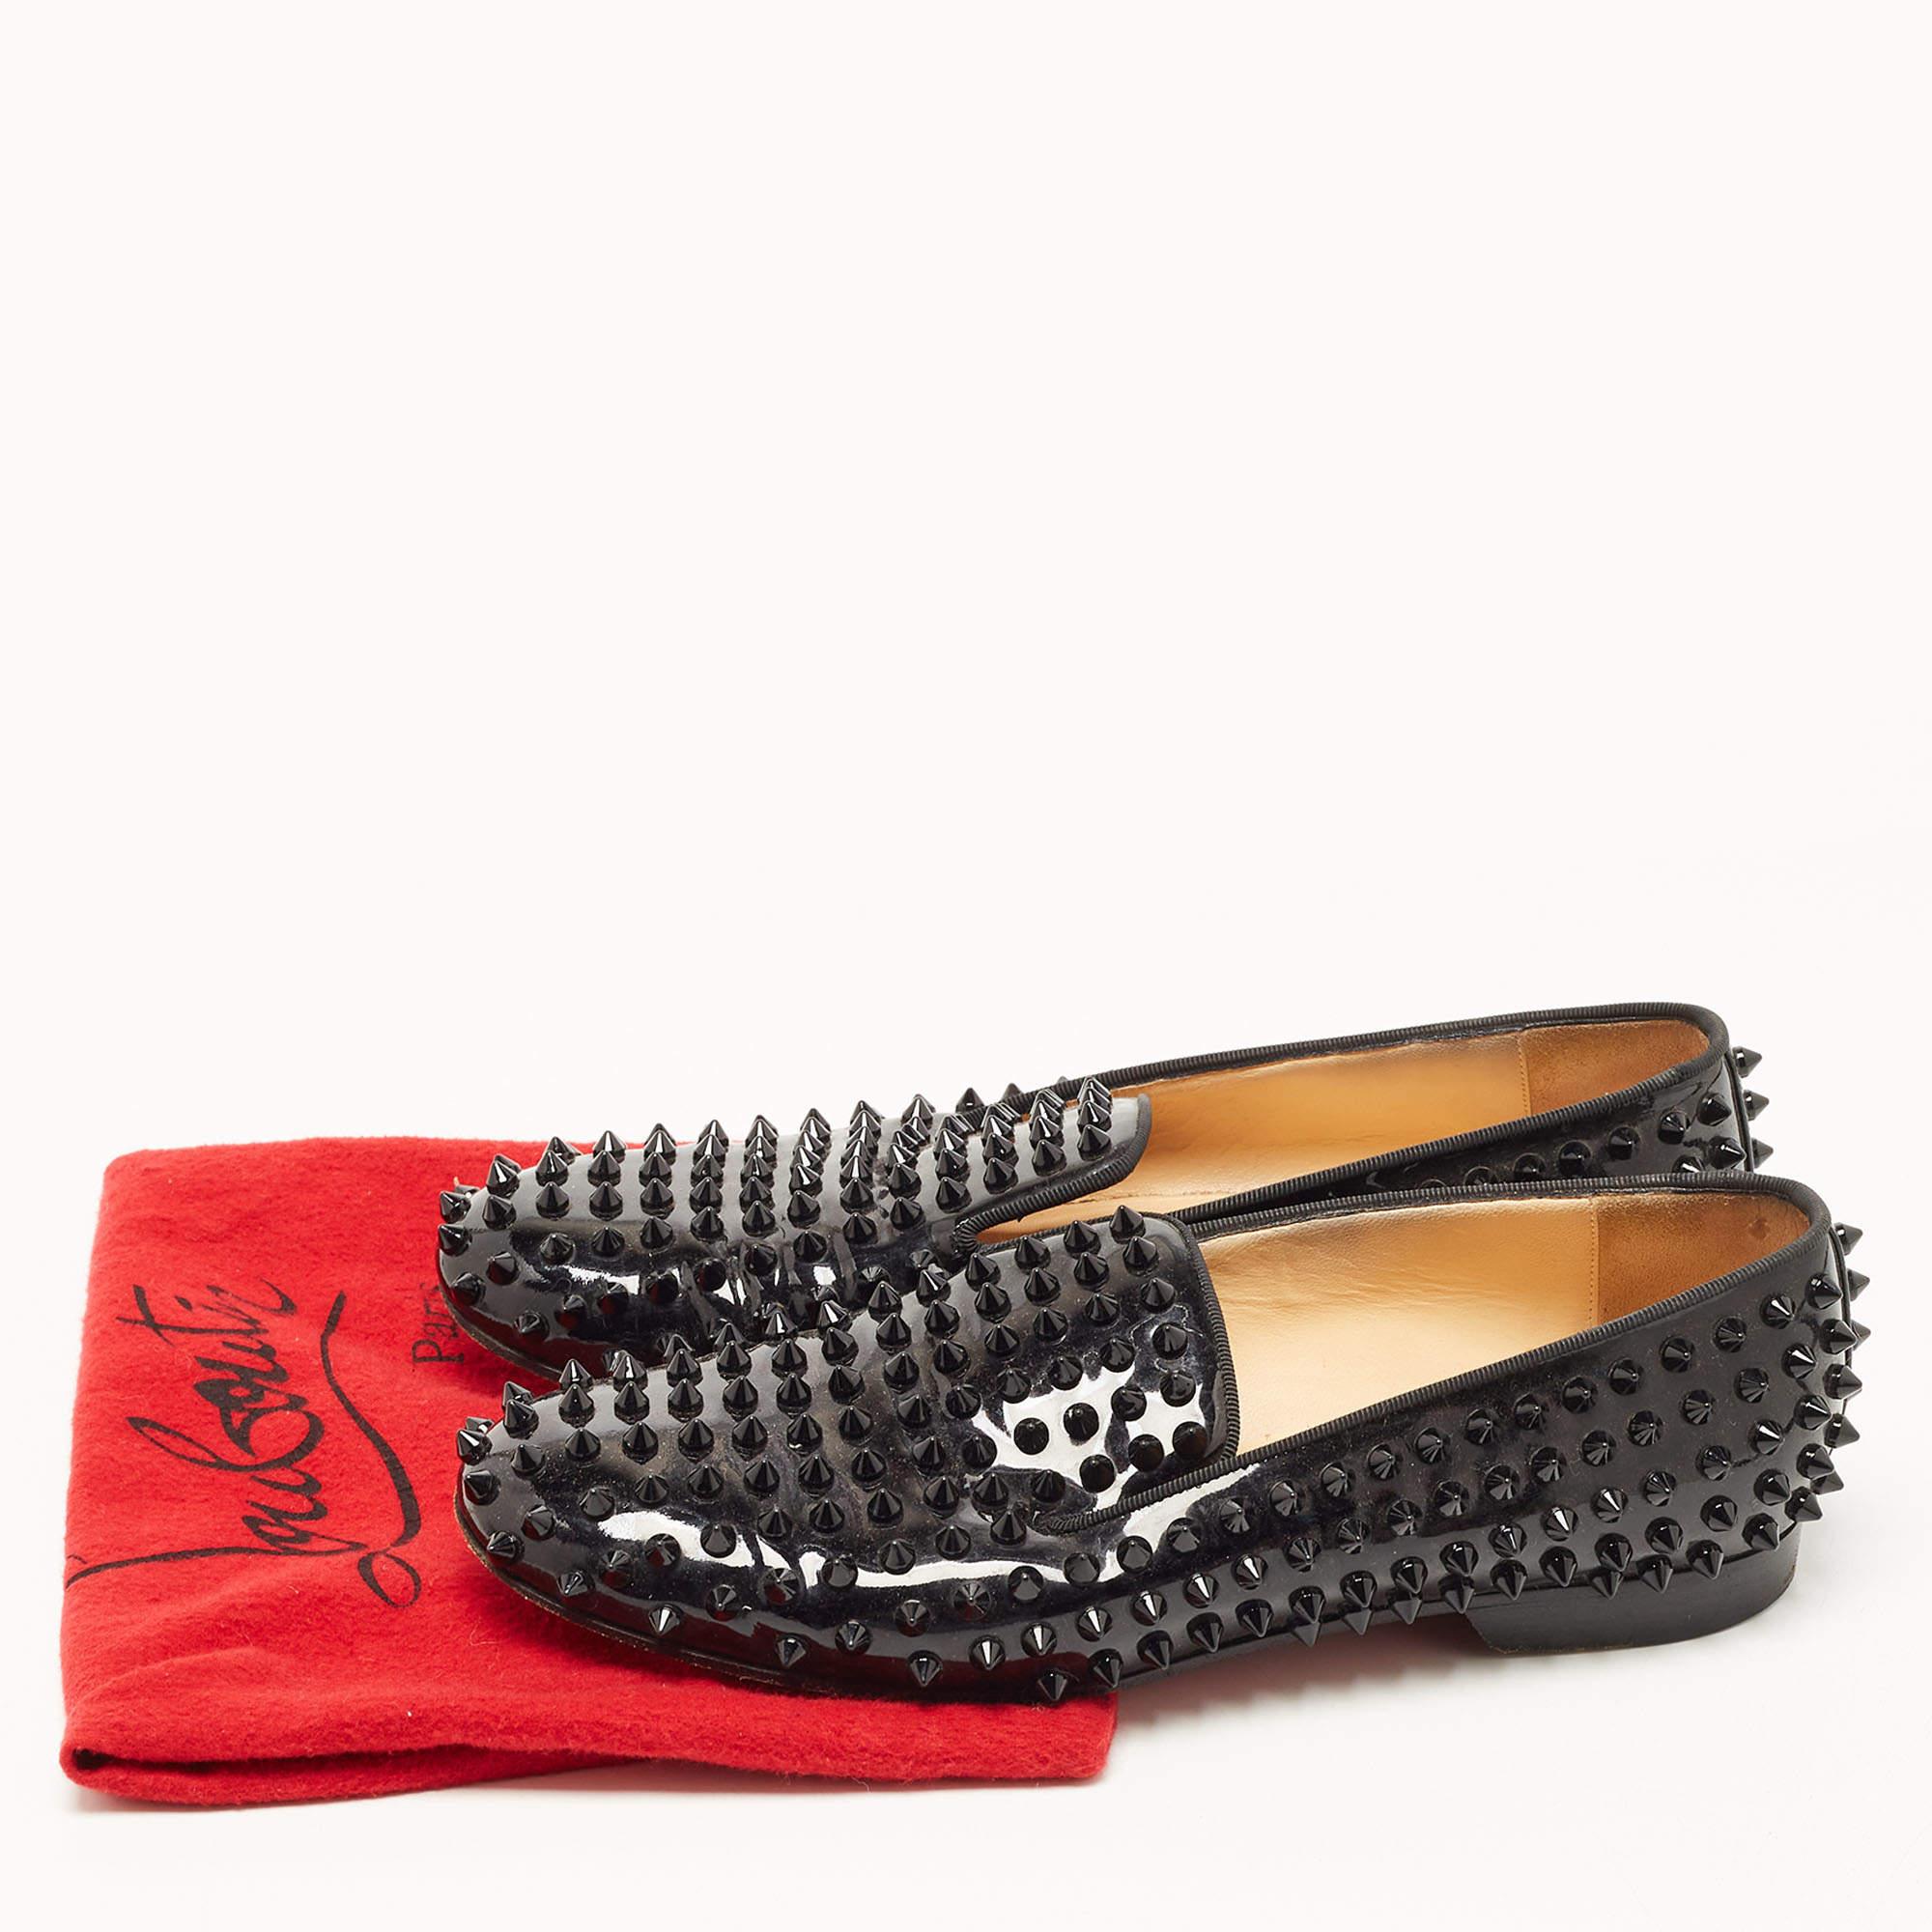 Christian Louboutin Black Dandelion Spikes Smoking Slippers Size 38 For Sale 4